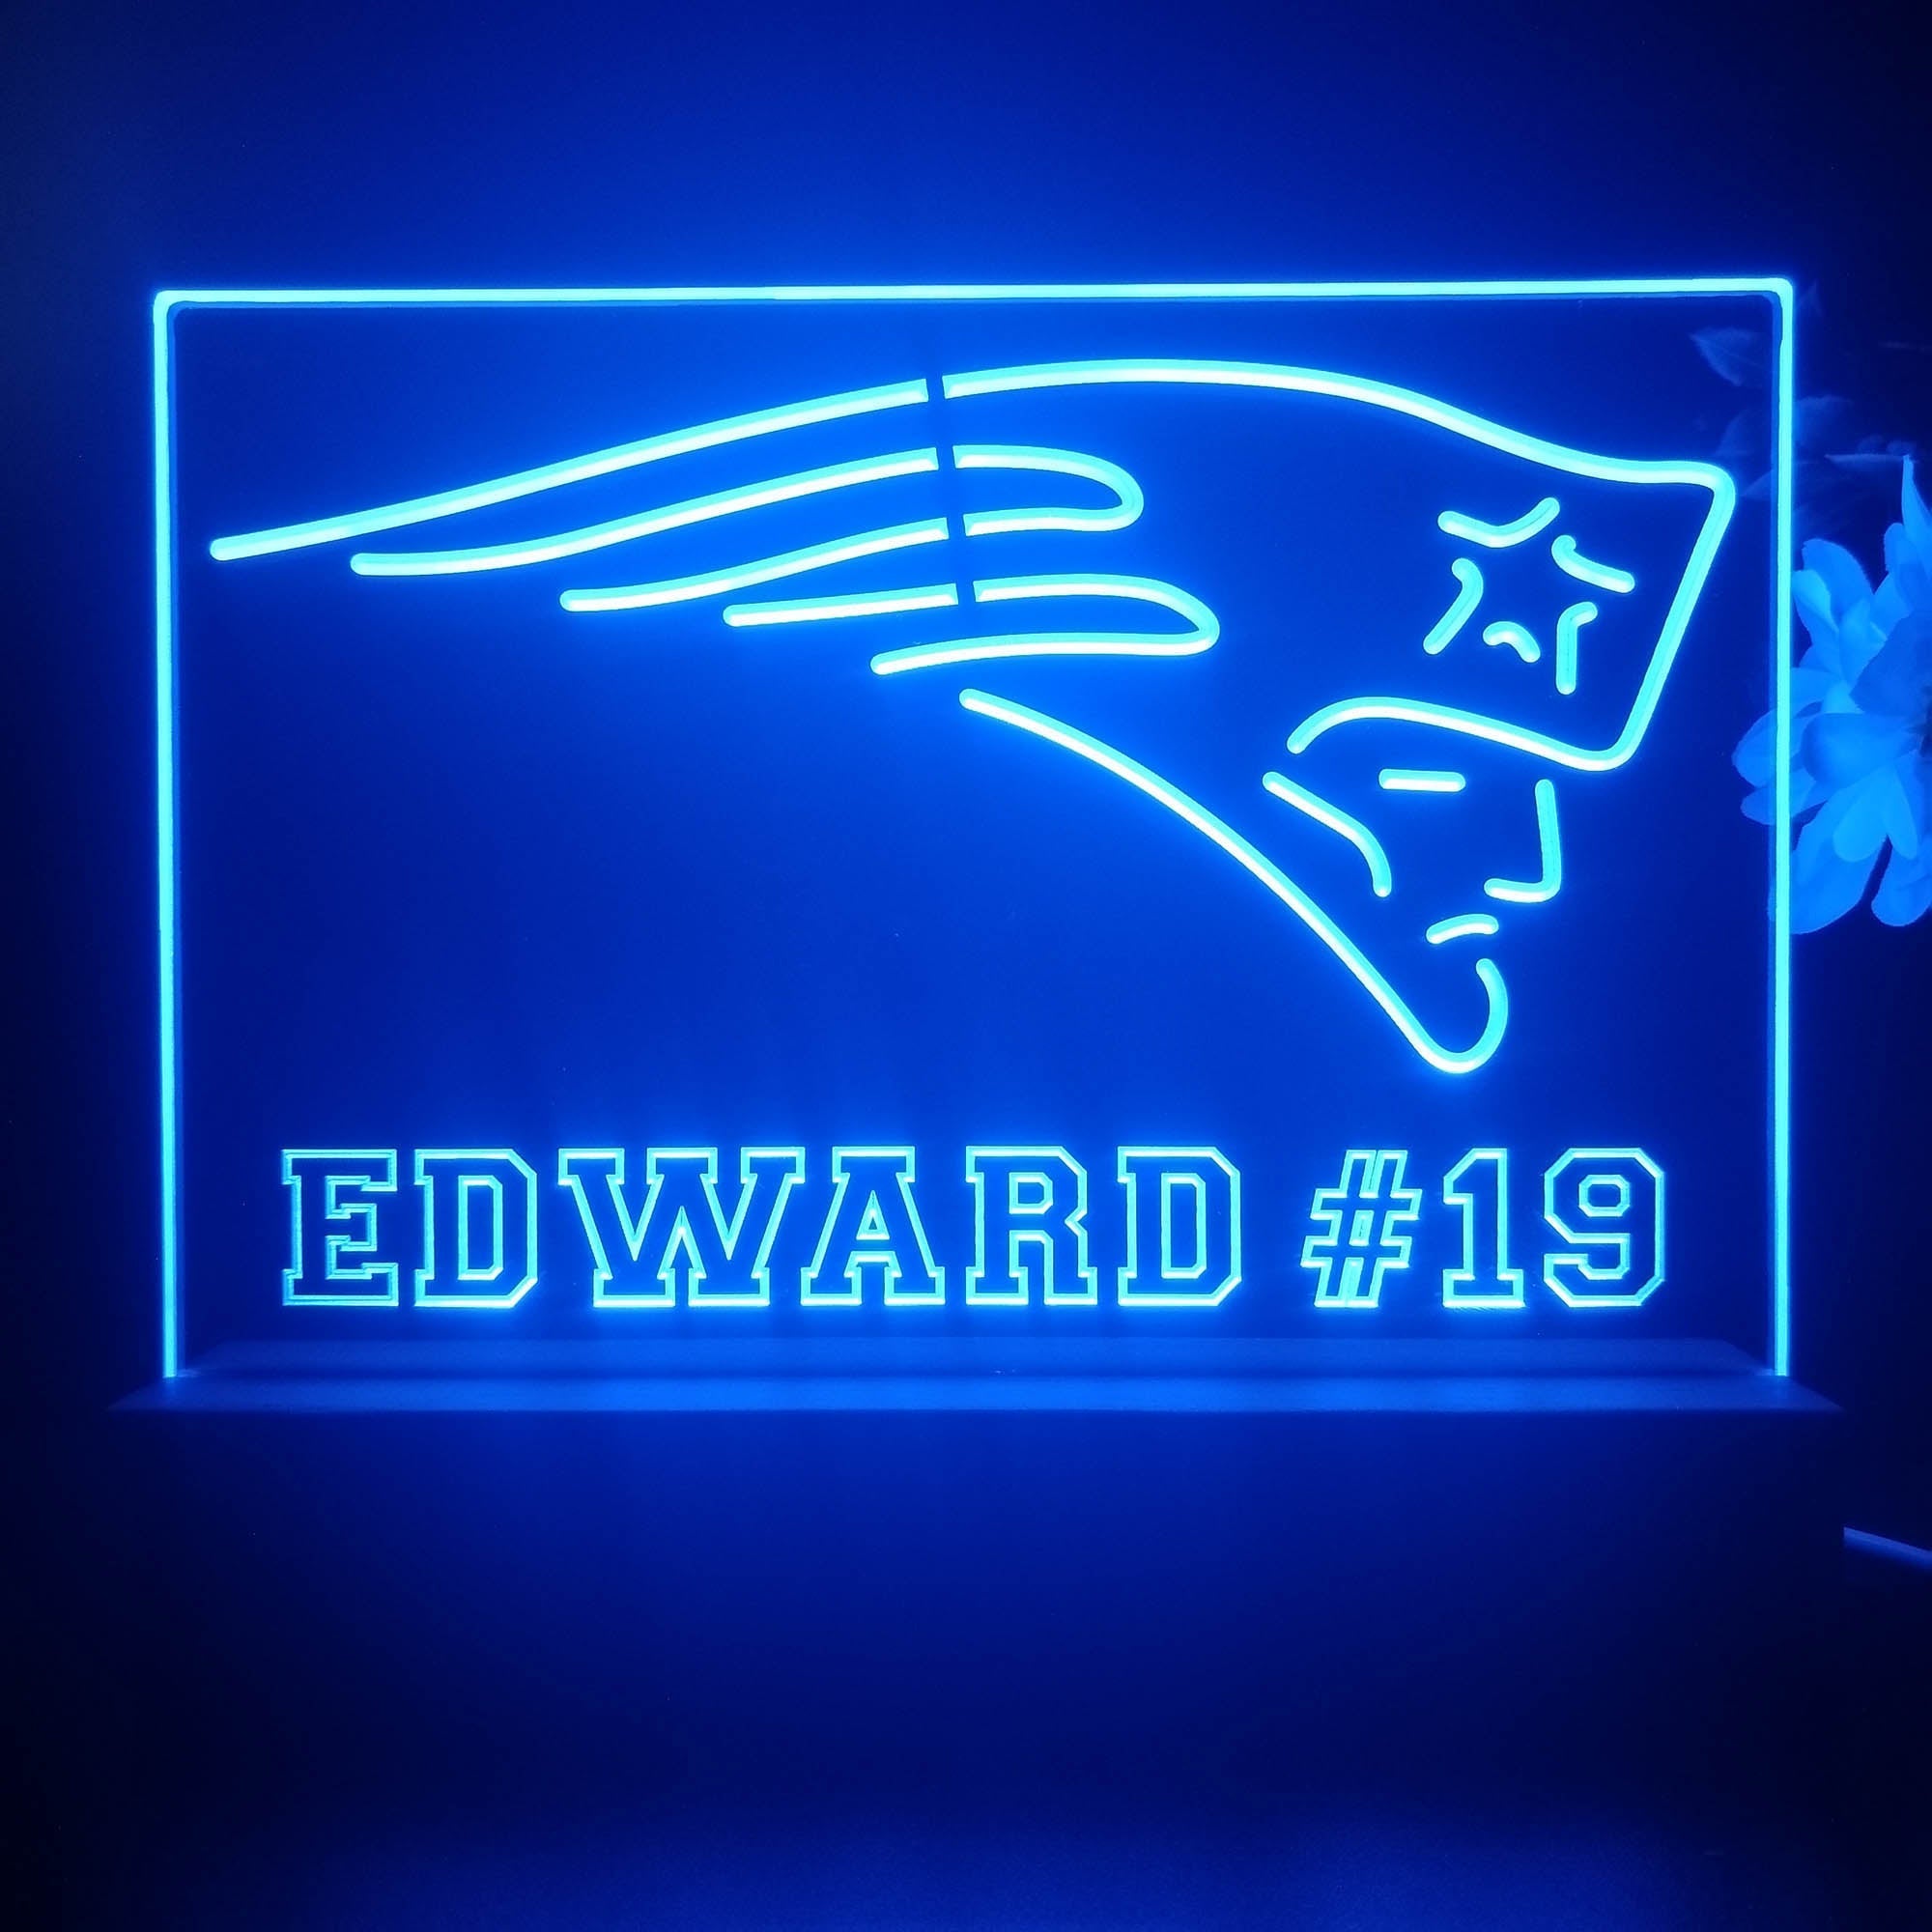 Personalized New England Patriots Souvenir Neon LED Night Light Sign